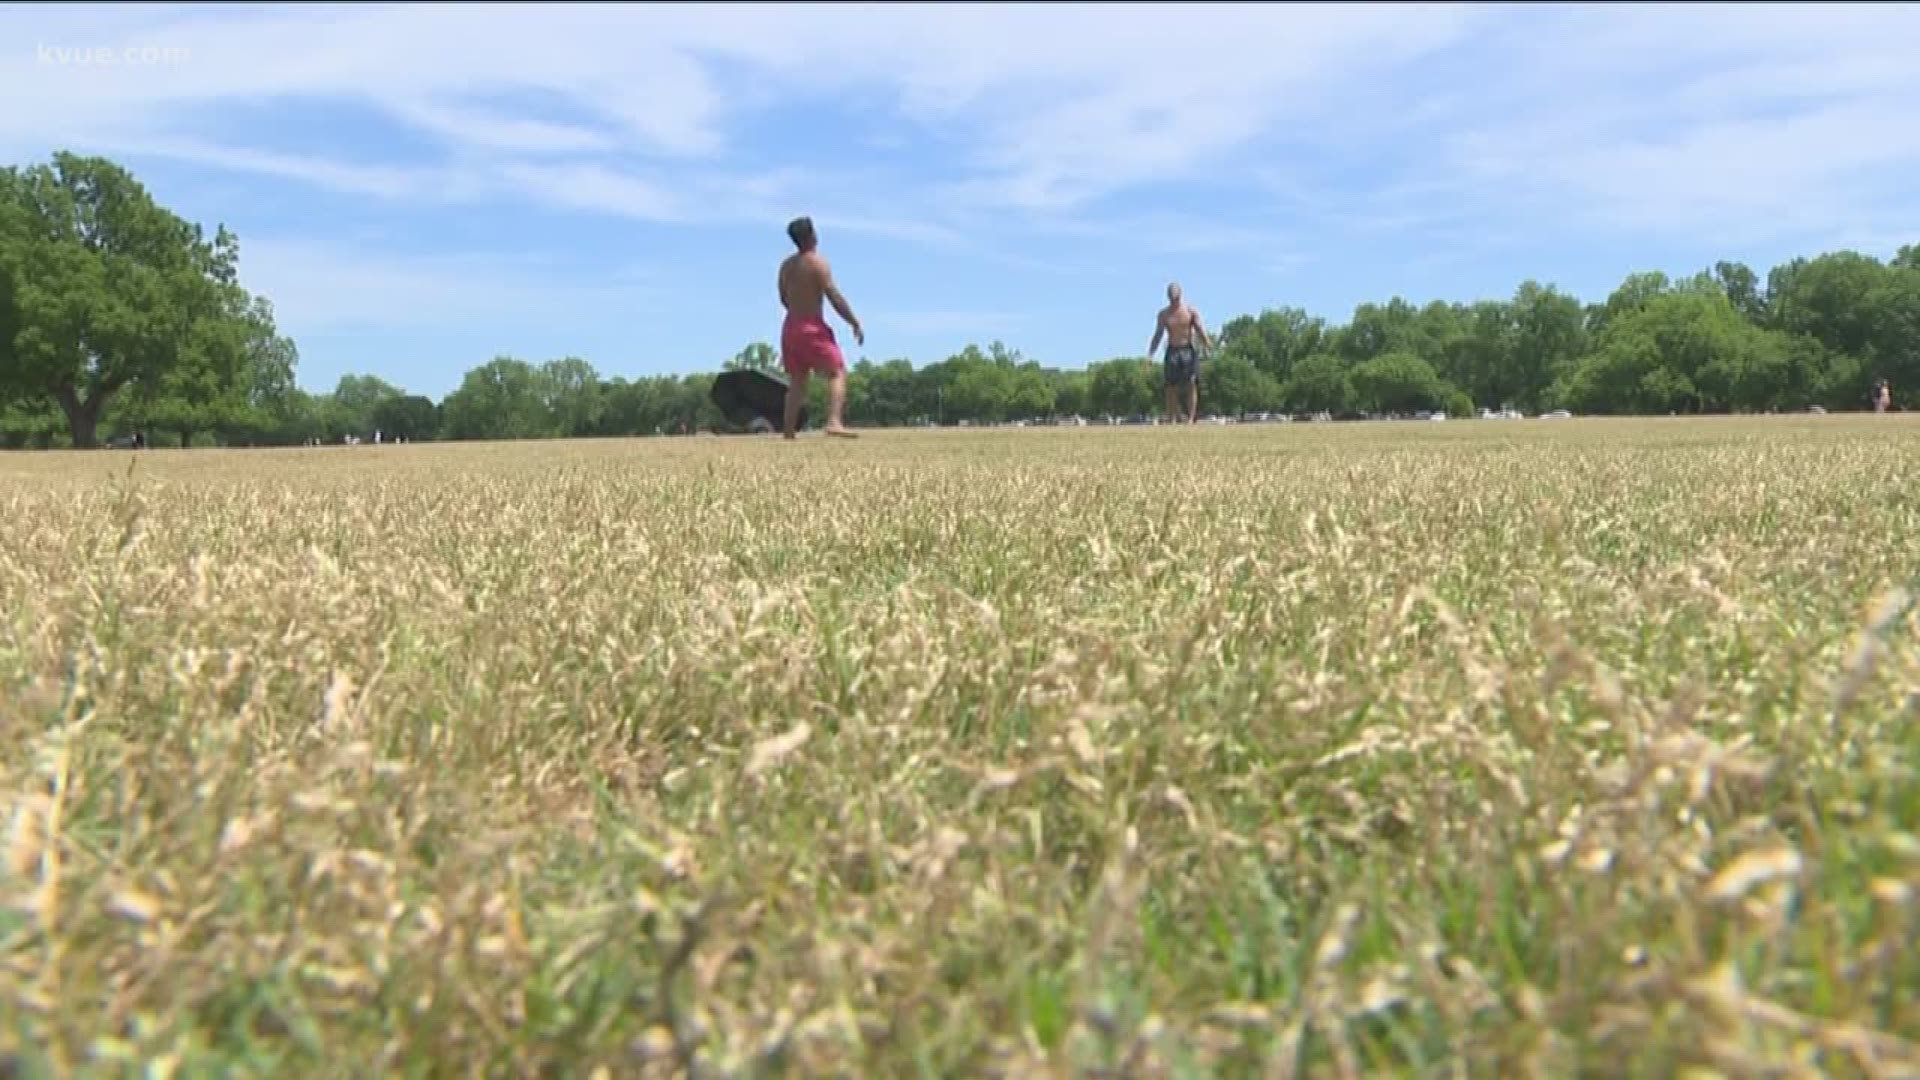 More people are being spotted outdoors as coronavirus restrictions are loosened across the state.